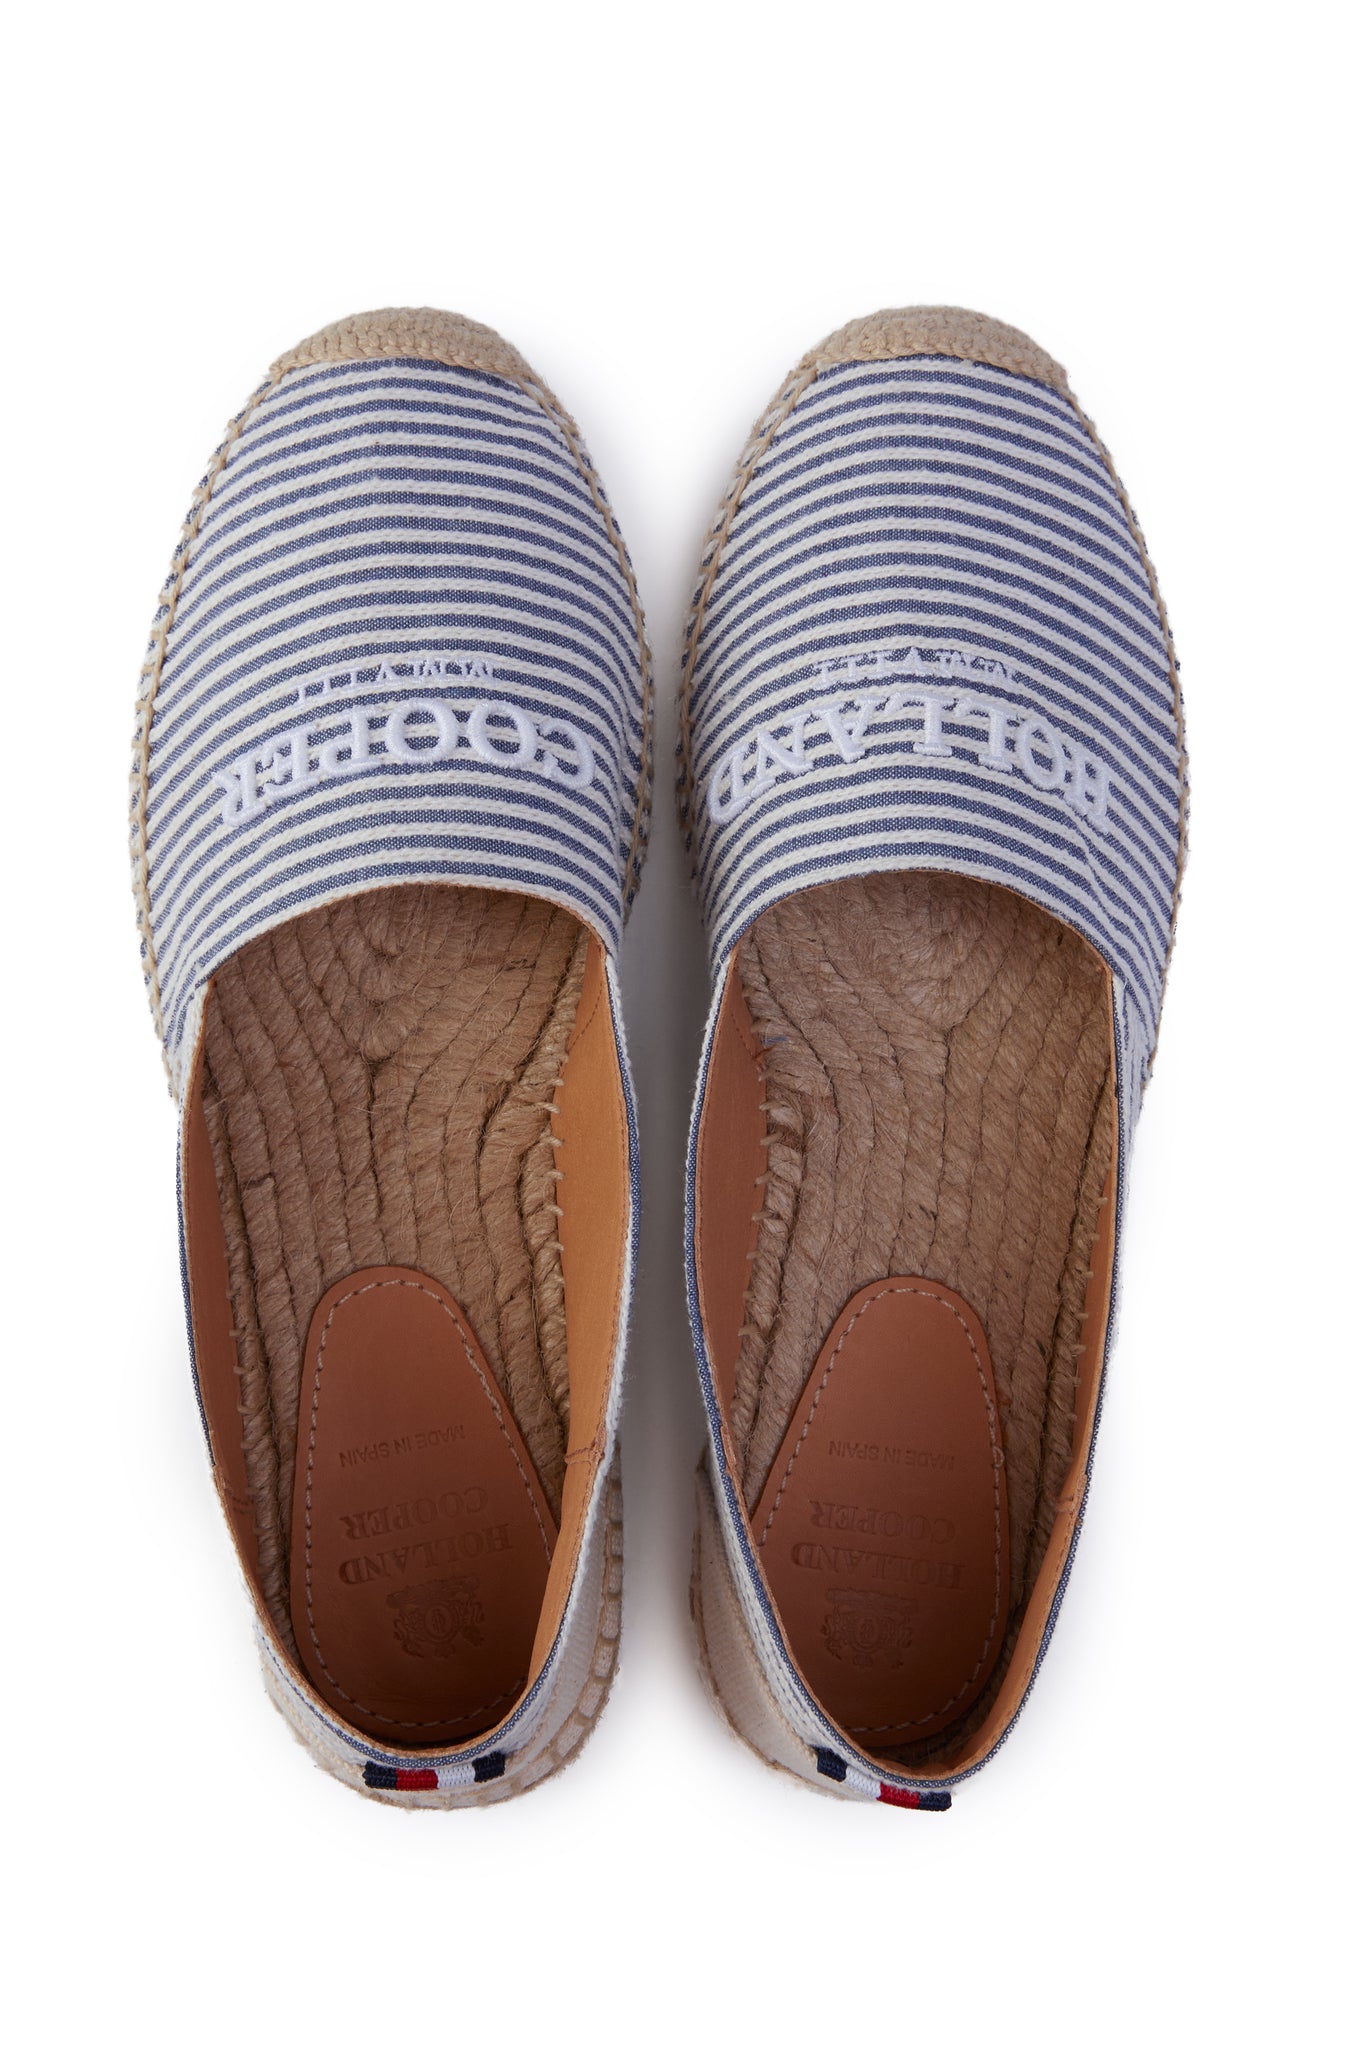 birds eye view of classic style white and blue striped canvas espadrille with plaited jute sole and jute toe cap with white embroidered branding on top